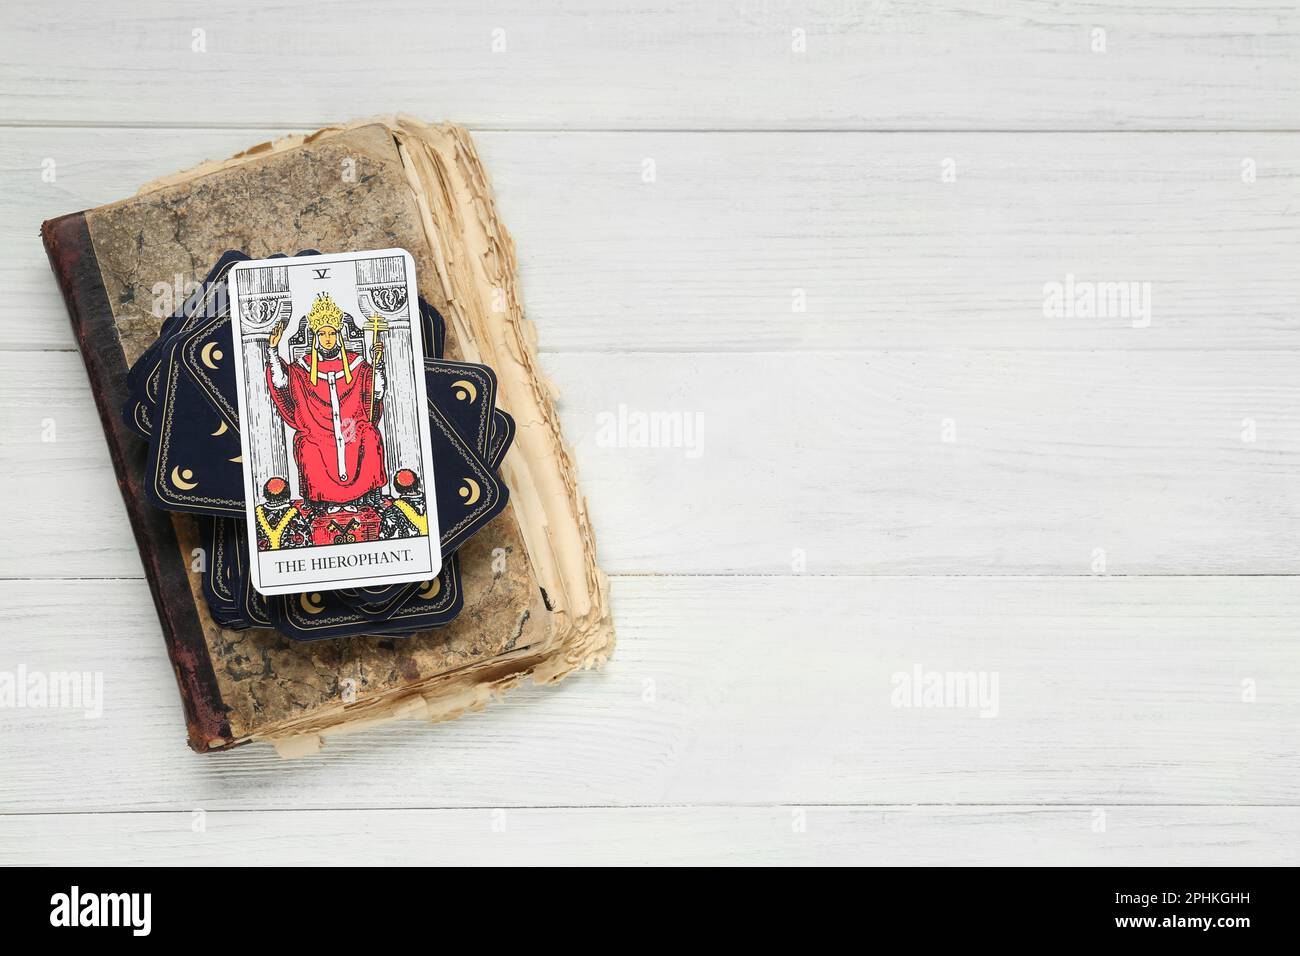 The Hierophant and other tarot cards with old book on white wooden table, top view. Space for text Stock Photo